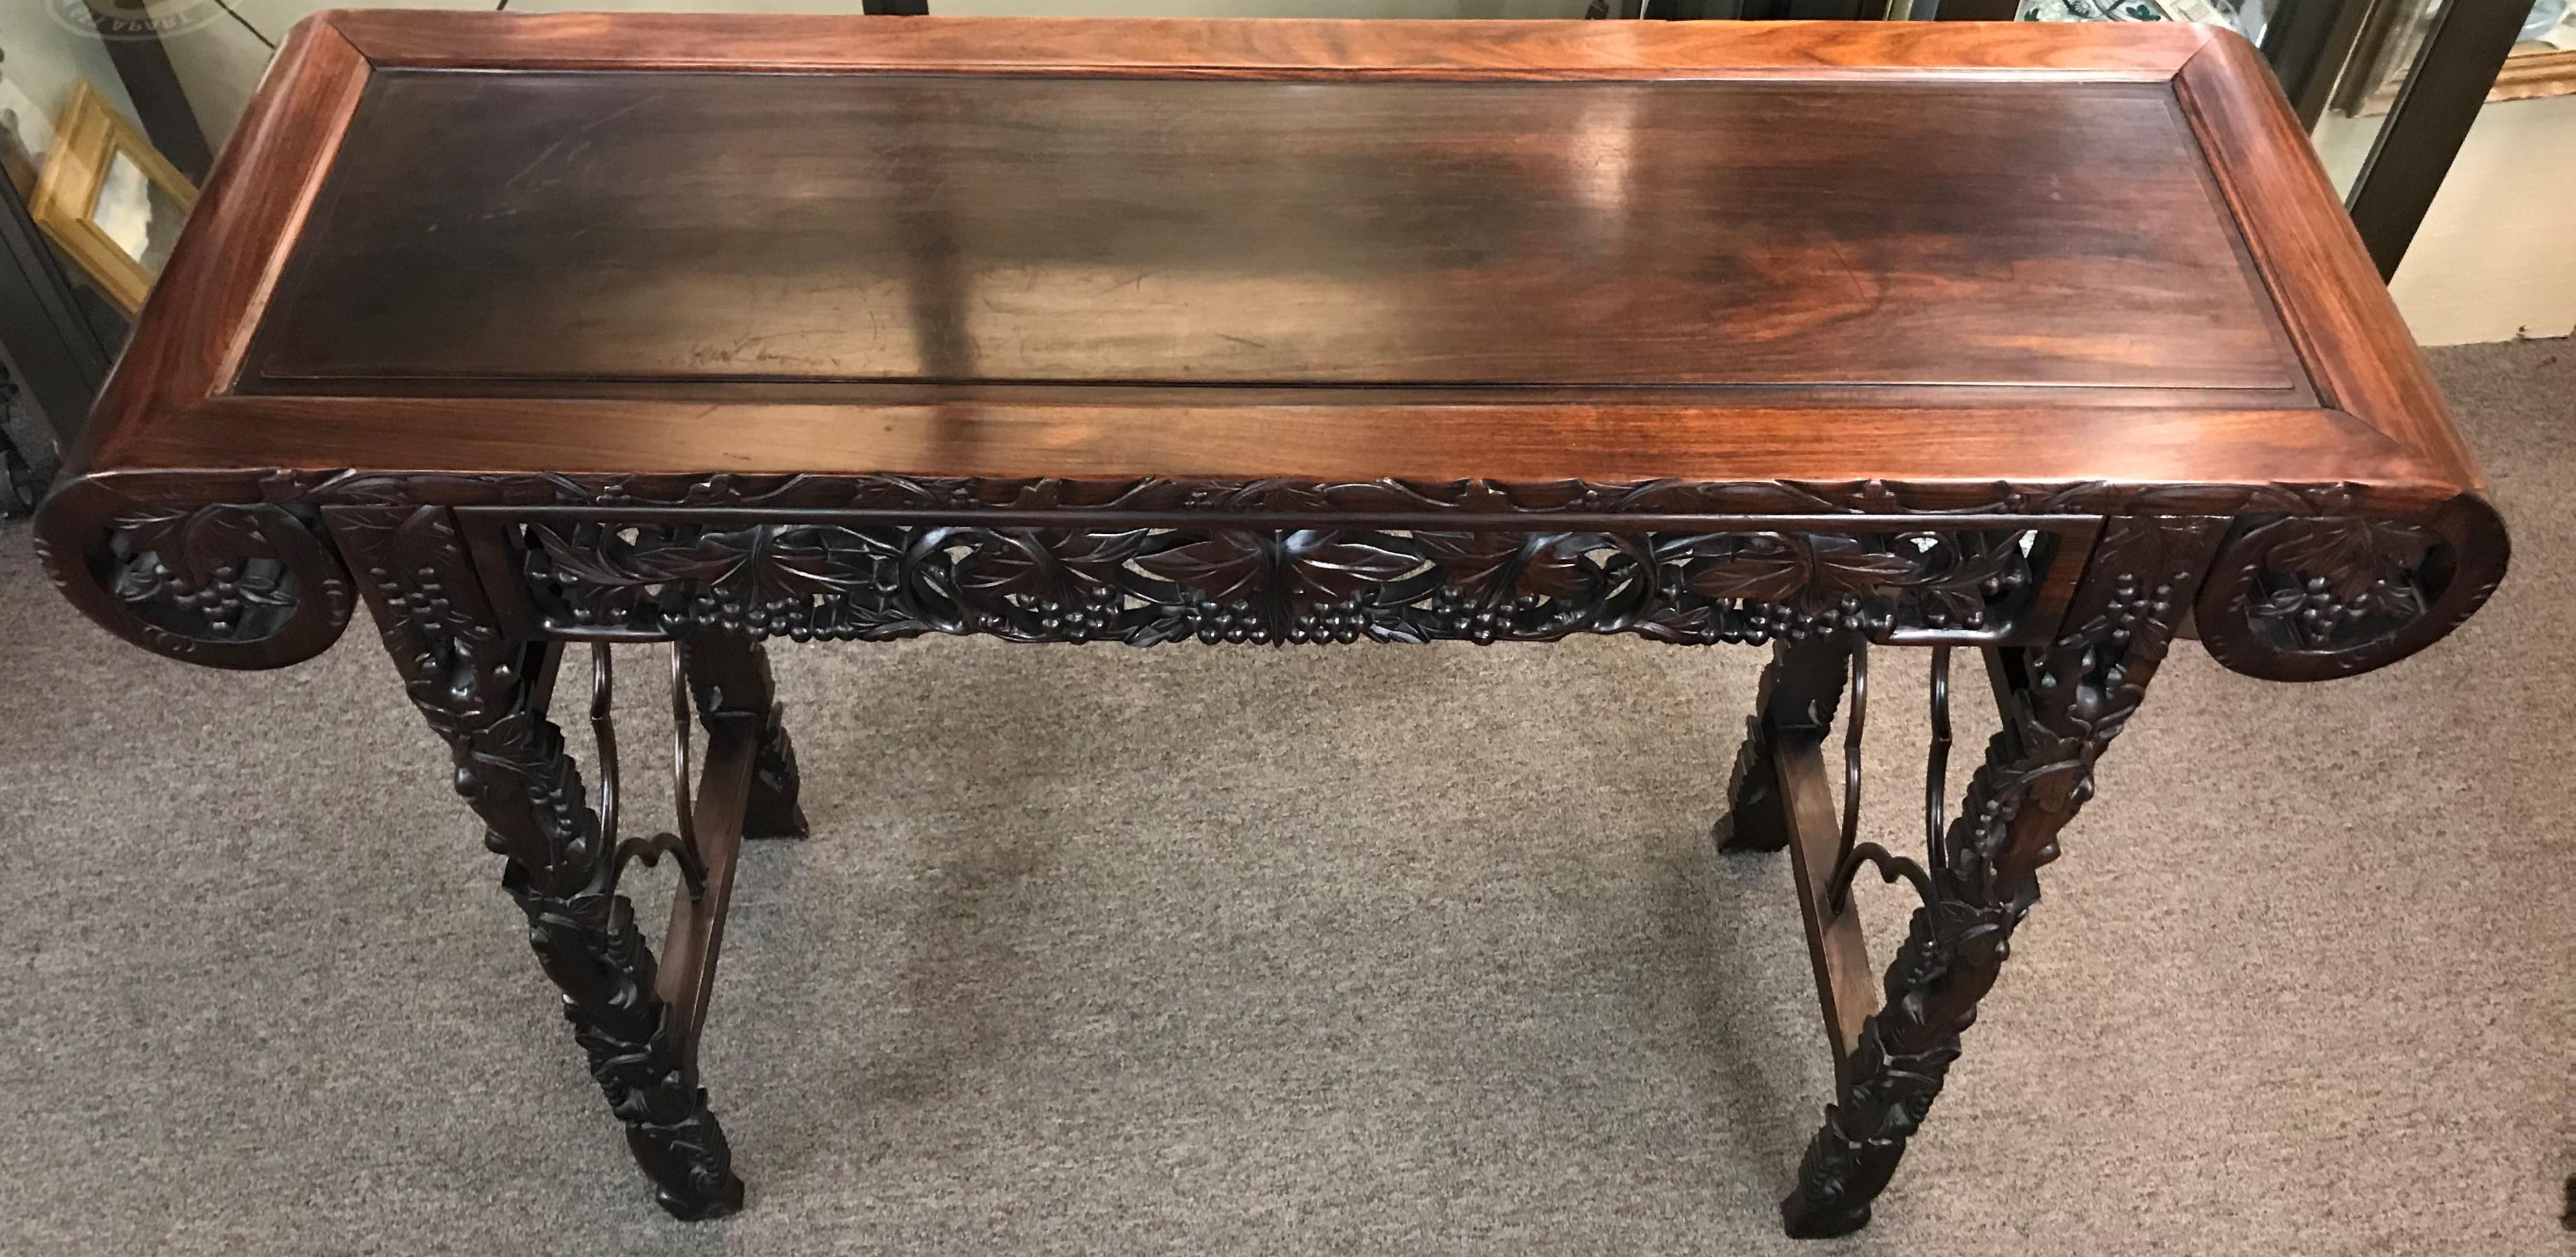 Chinese Export Chinese Rosewood Carved Altar Table with Reticulated Grape and Leaf Decoration